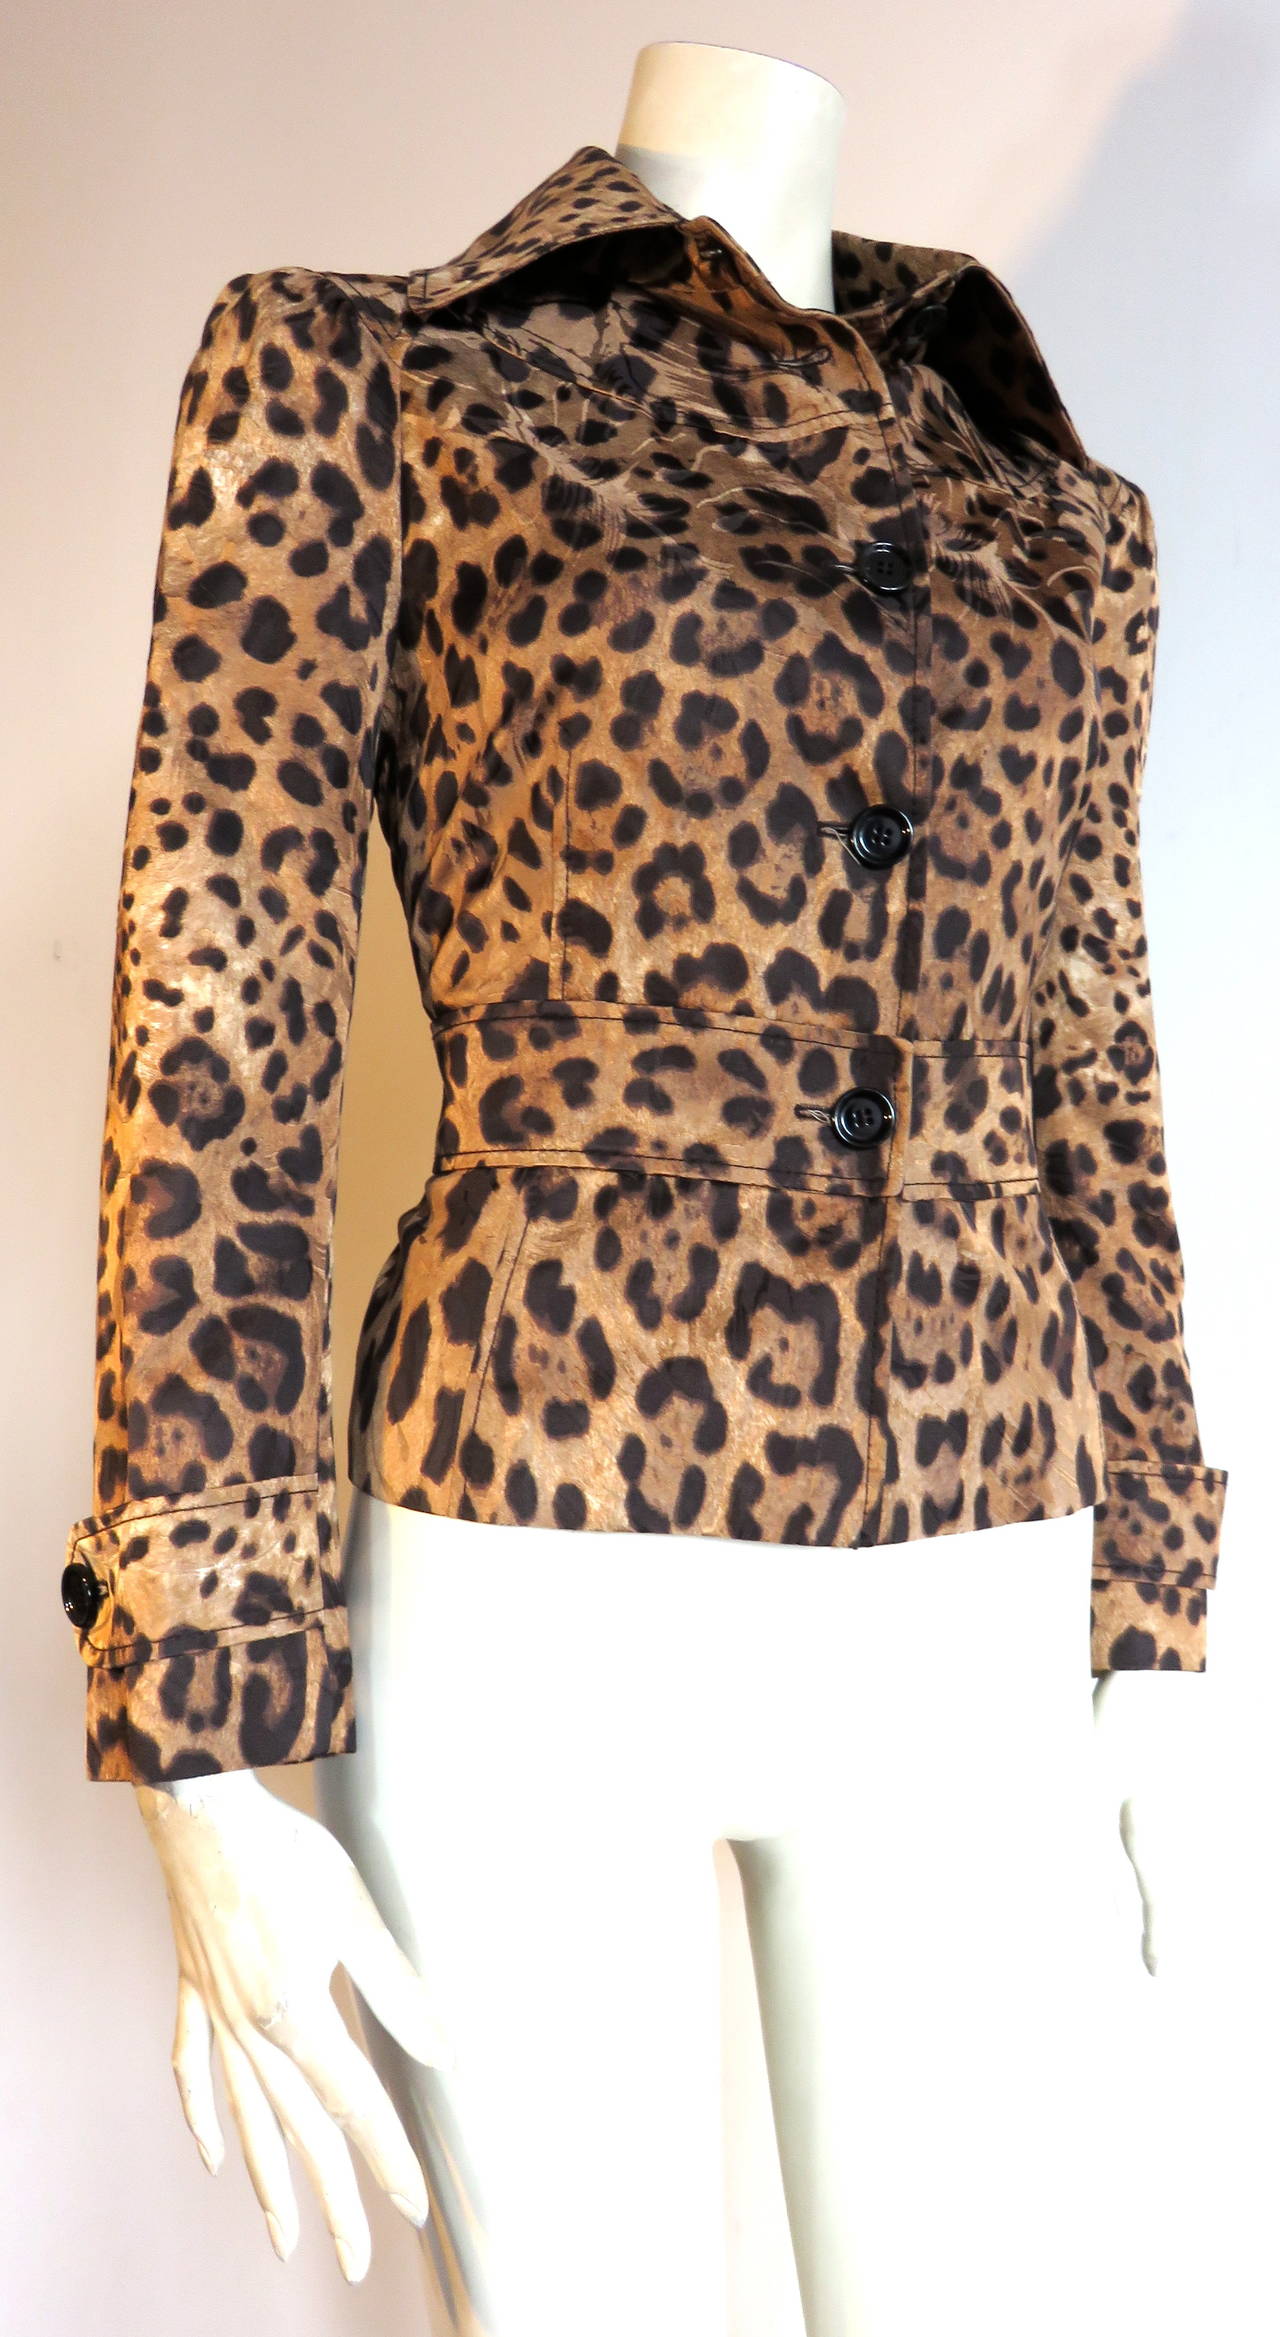 Excellent condition DOLCE & GABBANA Leopard printed jacquard jacket.

Leopard artwork is printed atop jacquard woven fabric.

Wide waistband detail with generously shaped collar.  

Circular seam construction around top neck opening.

Fully